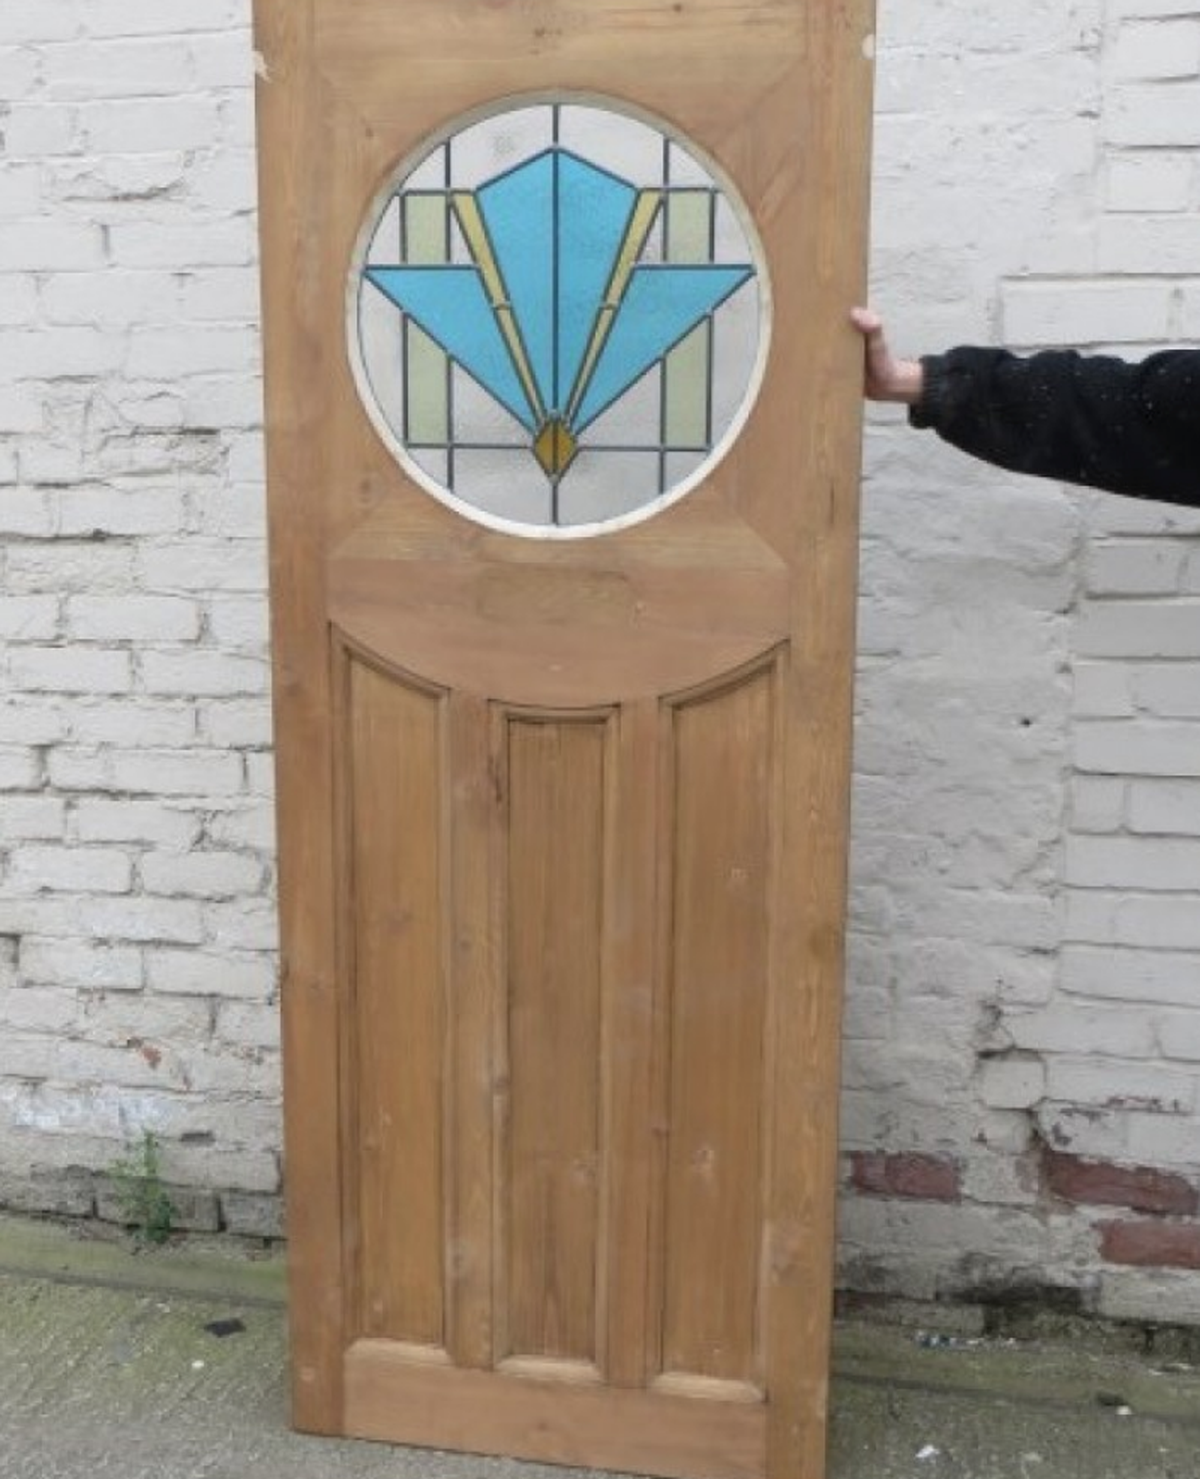 Secondhand Chairs And Tables Home Furniture 1930 Edwardian Stained Glass Exterior Door Blue Art Deco